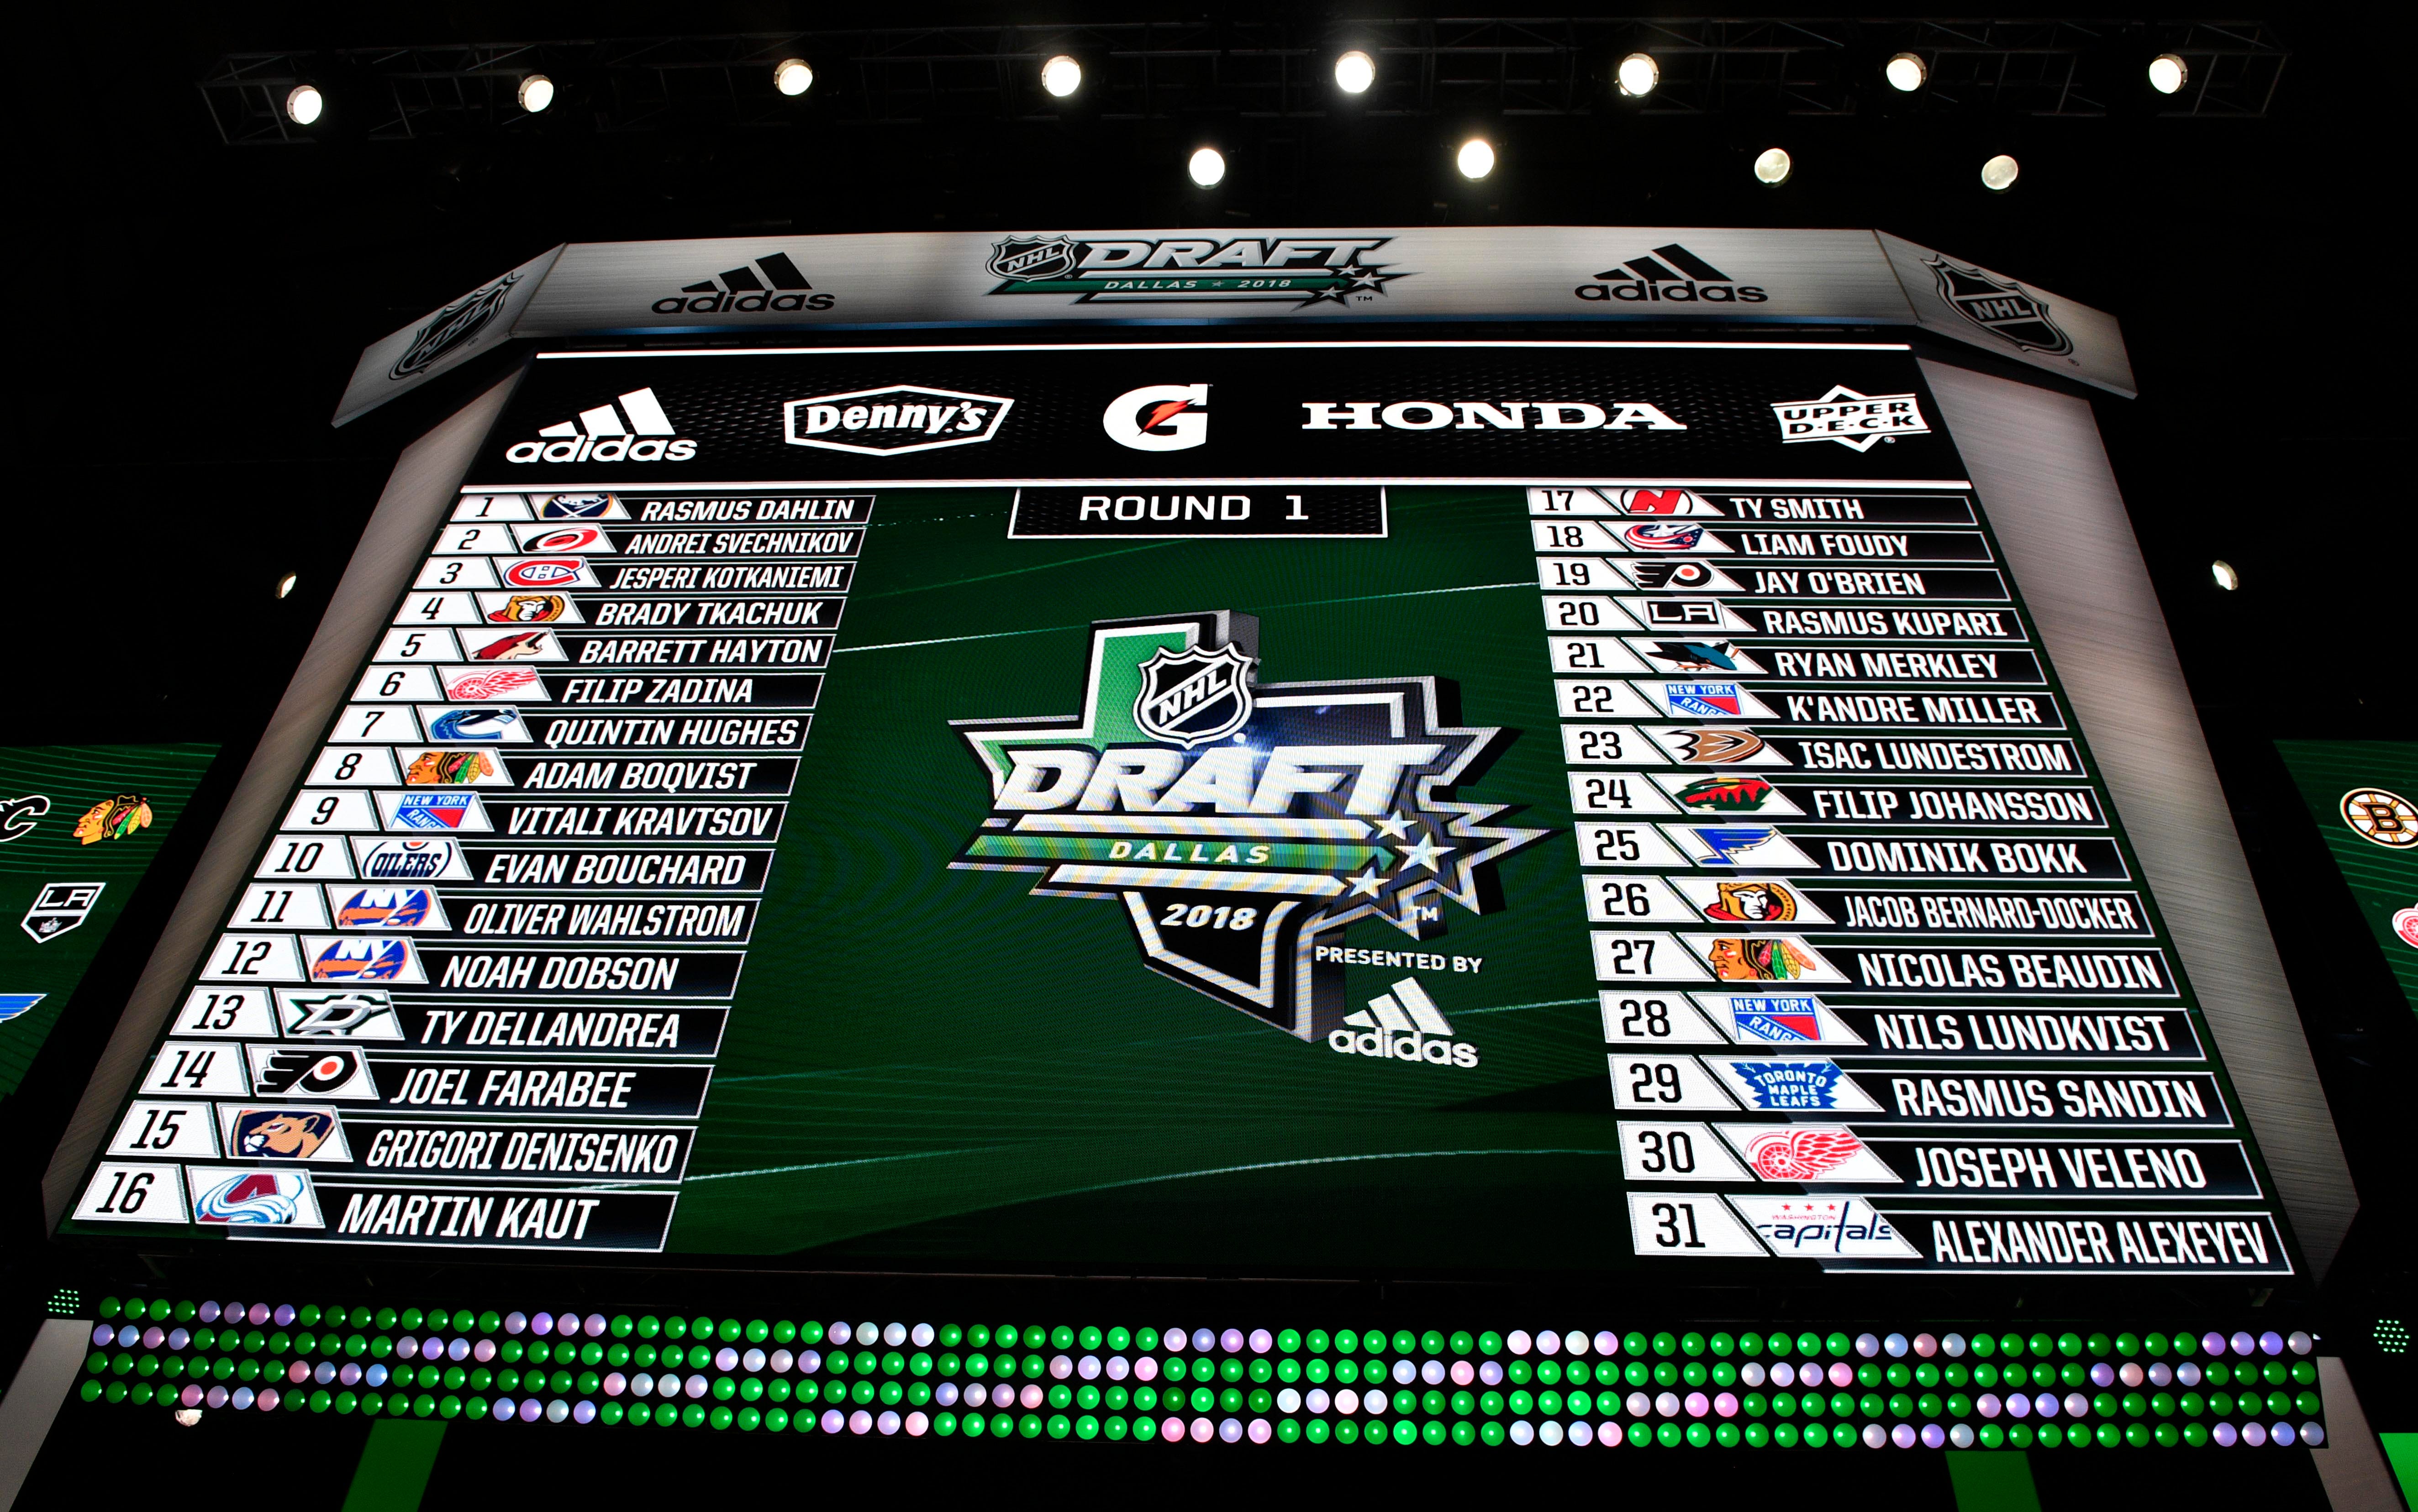 2019 NHL Draft order: Here's every pick 